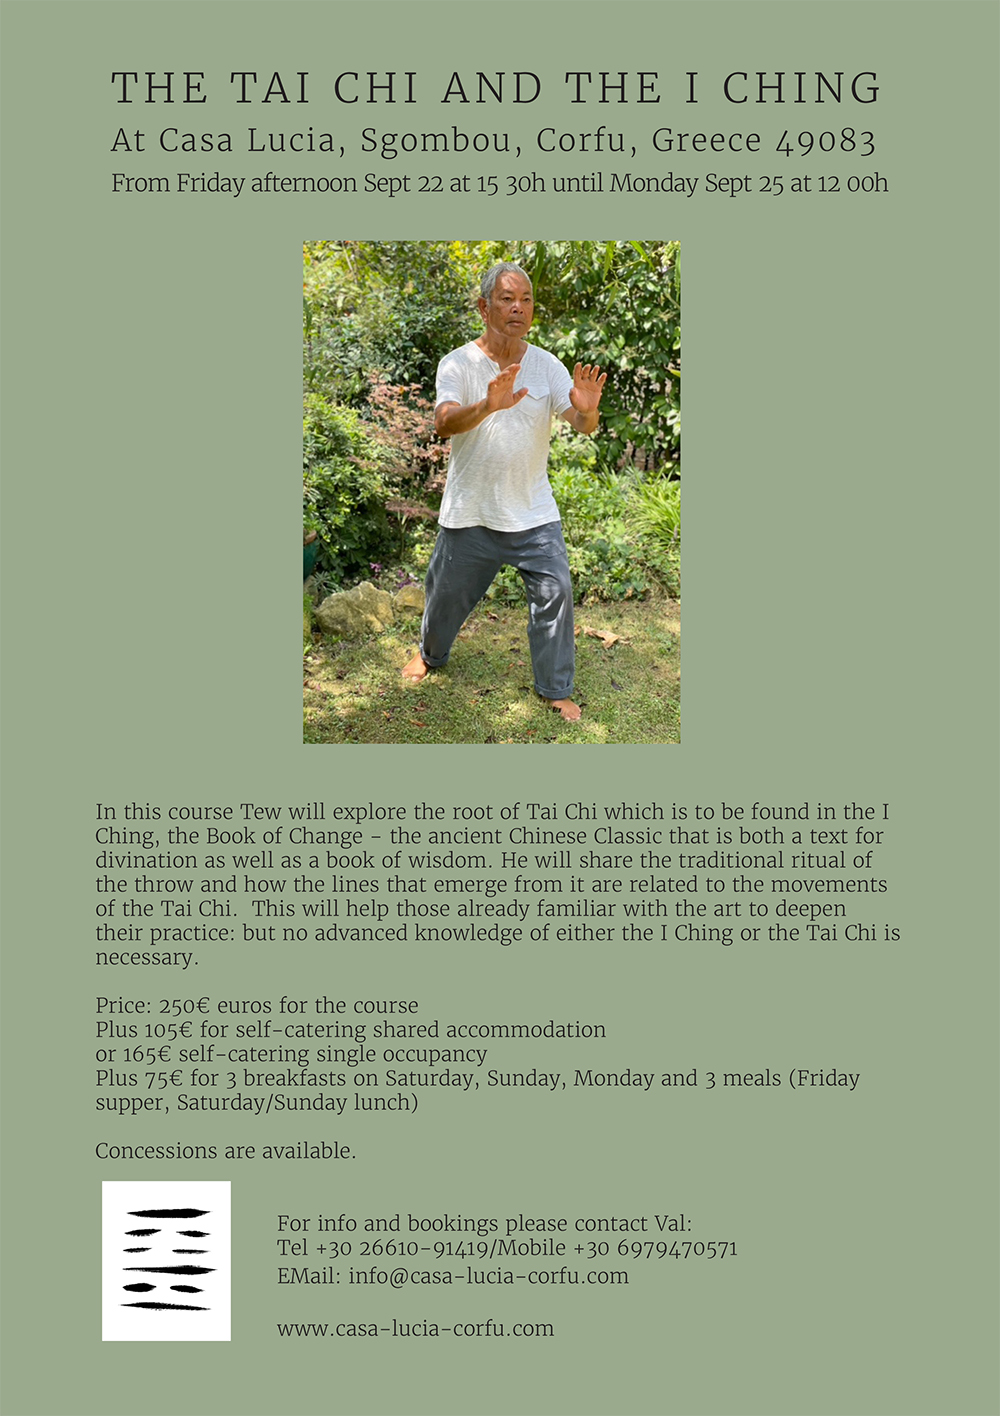 THE TAI CHI AND THE I CHING SEPT 23